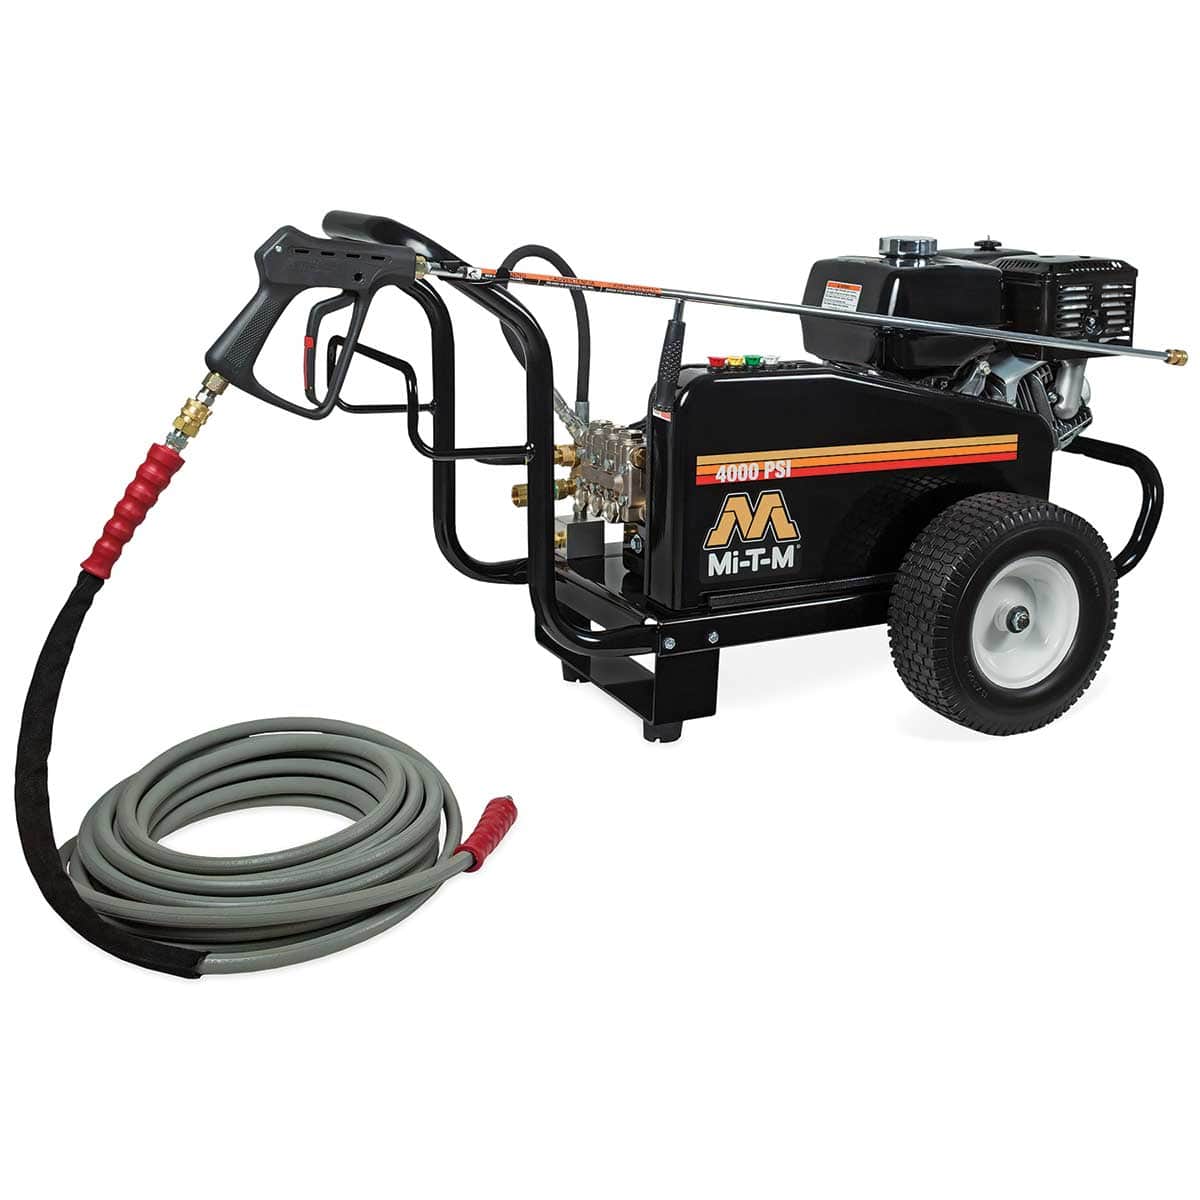 Cold Water Gas Pressure Washer, 13HP, 4000 PSI by Gemplers